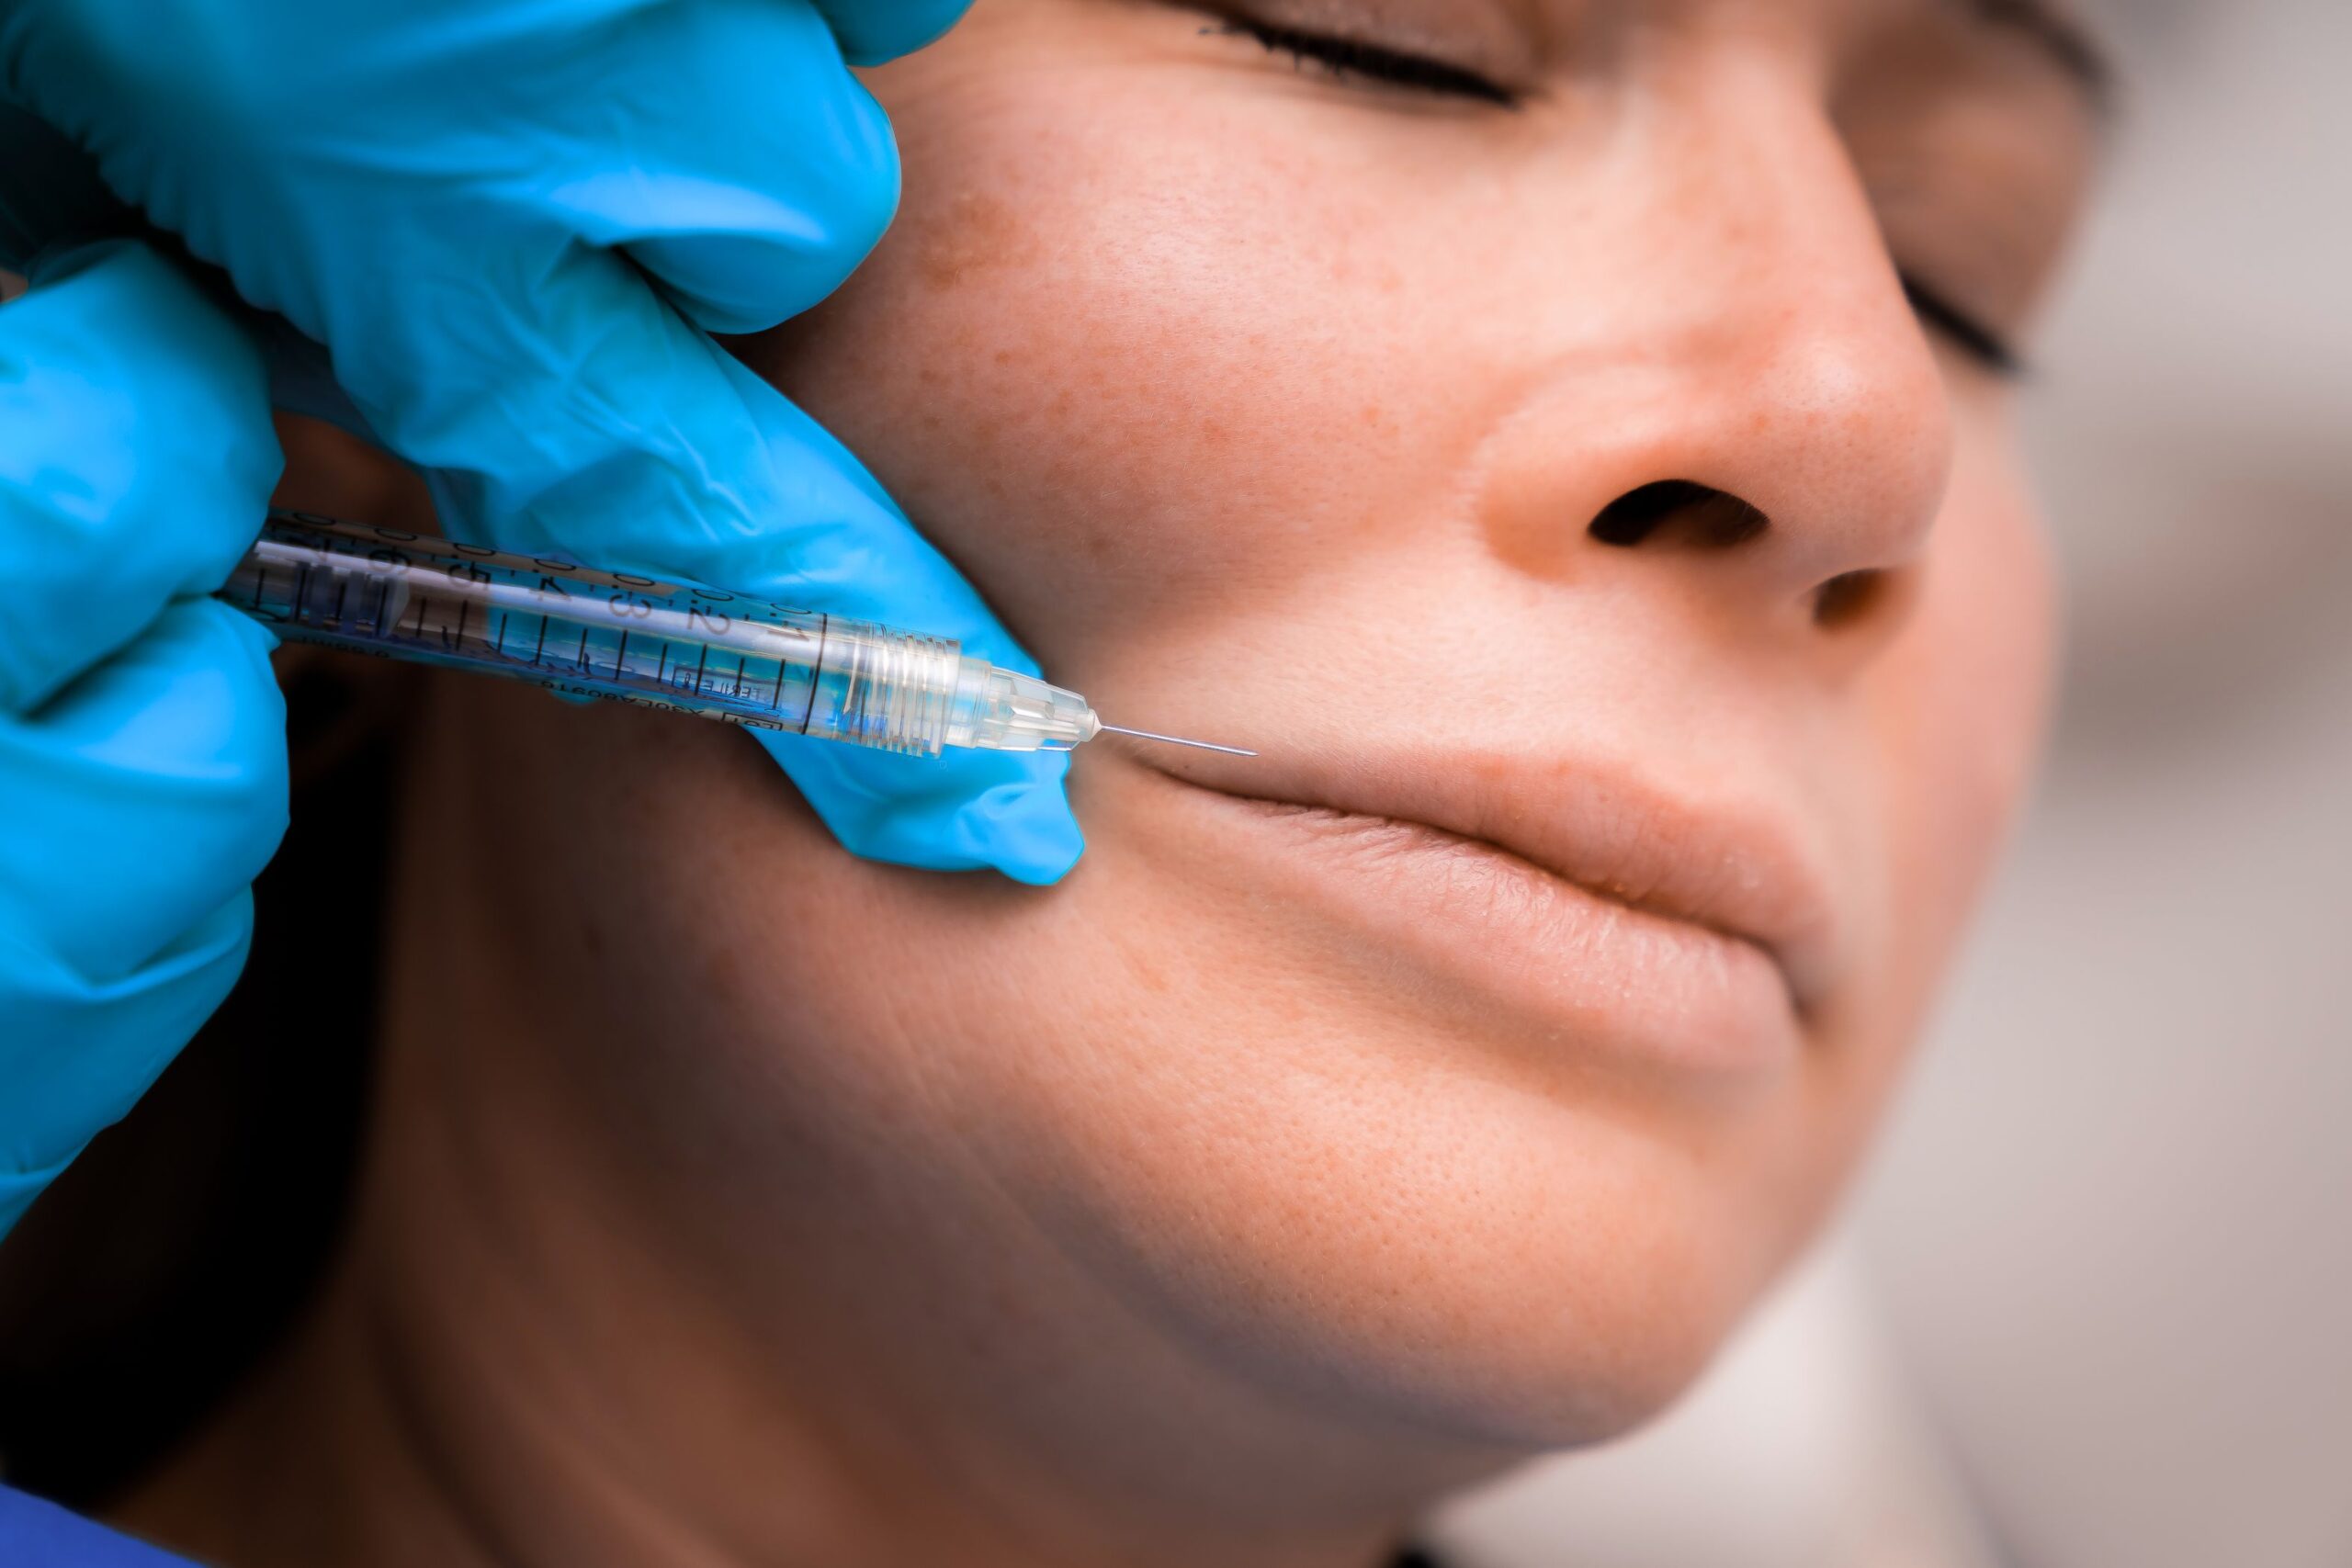 Dermal Fillers at Freyja Medical in Wrexham, Nantwich and Cheshire